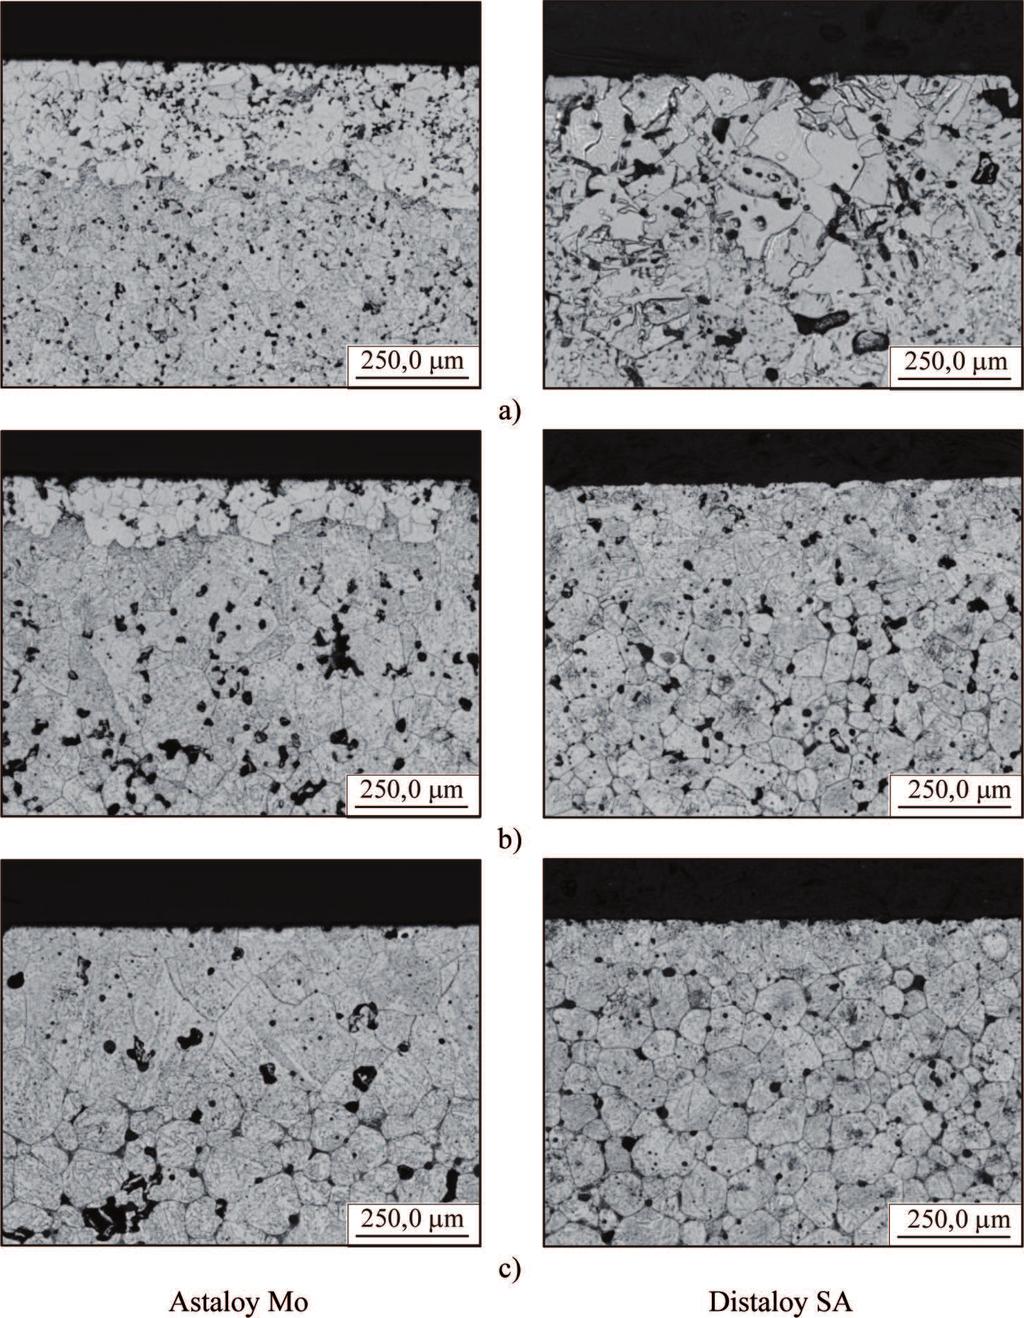 795 Fig. 7. Microstructures of inspissated surface layers of boron-modified Astaloy Mo and Distaloy SA sinters, respectively: a) 0.2% B; b) 0.4% B; c) 0.